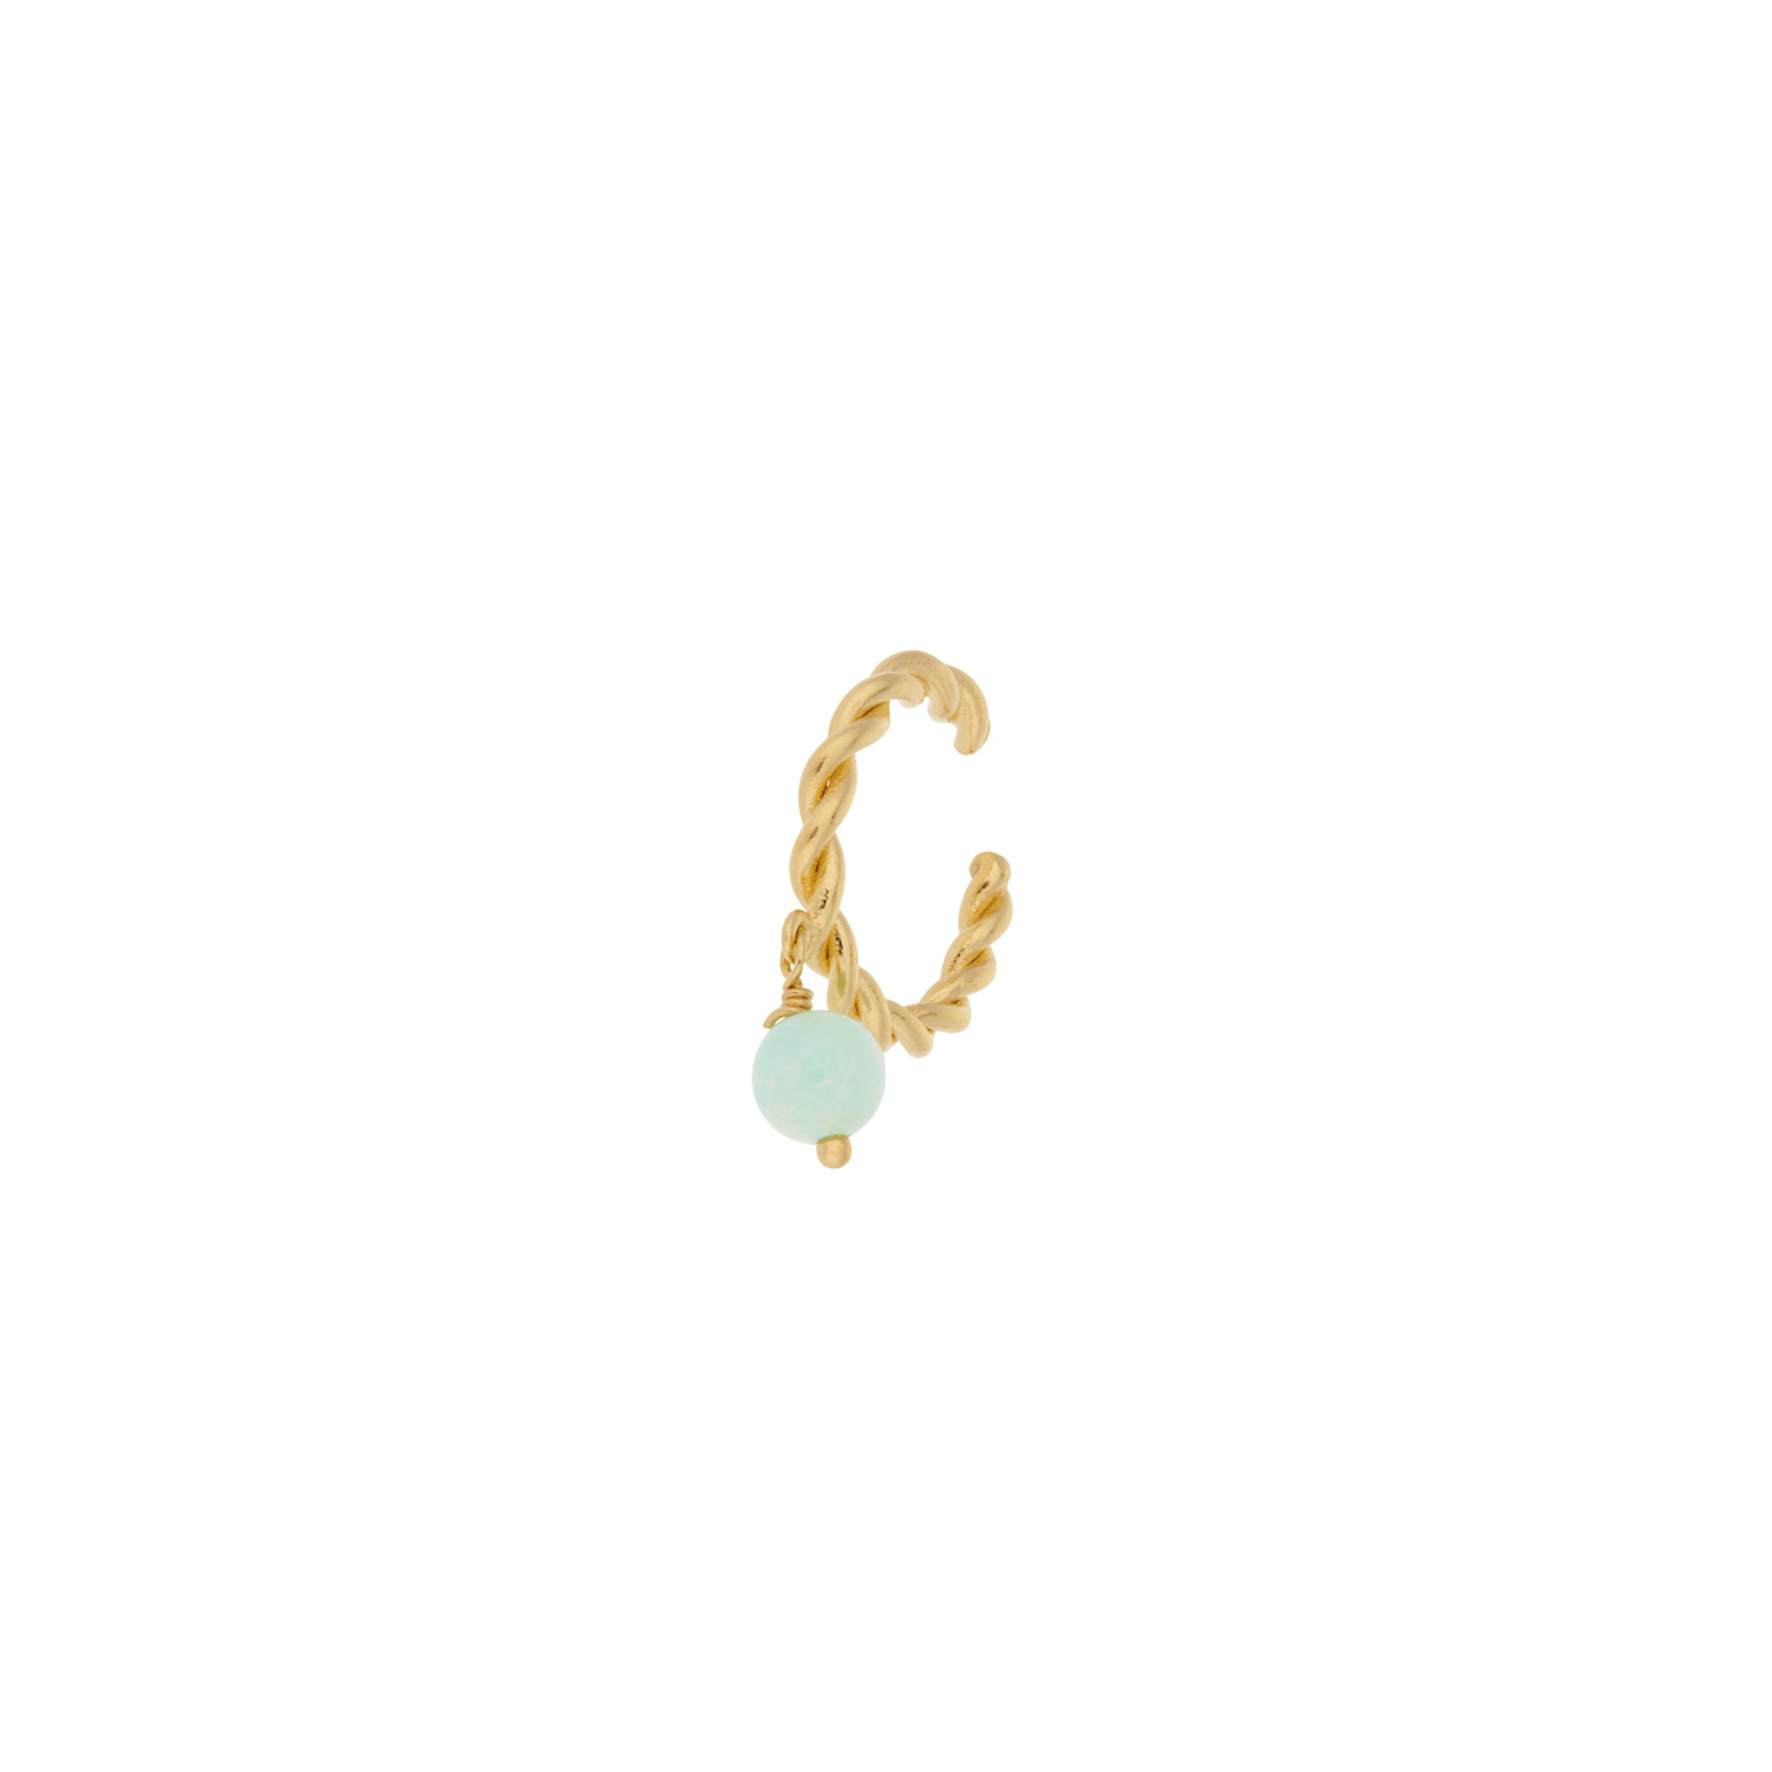 Fjord Earcuff from Pernille Corydon in Goldplated-Silver Sterling 925|Amazonite